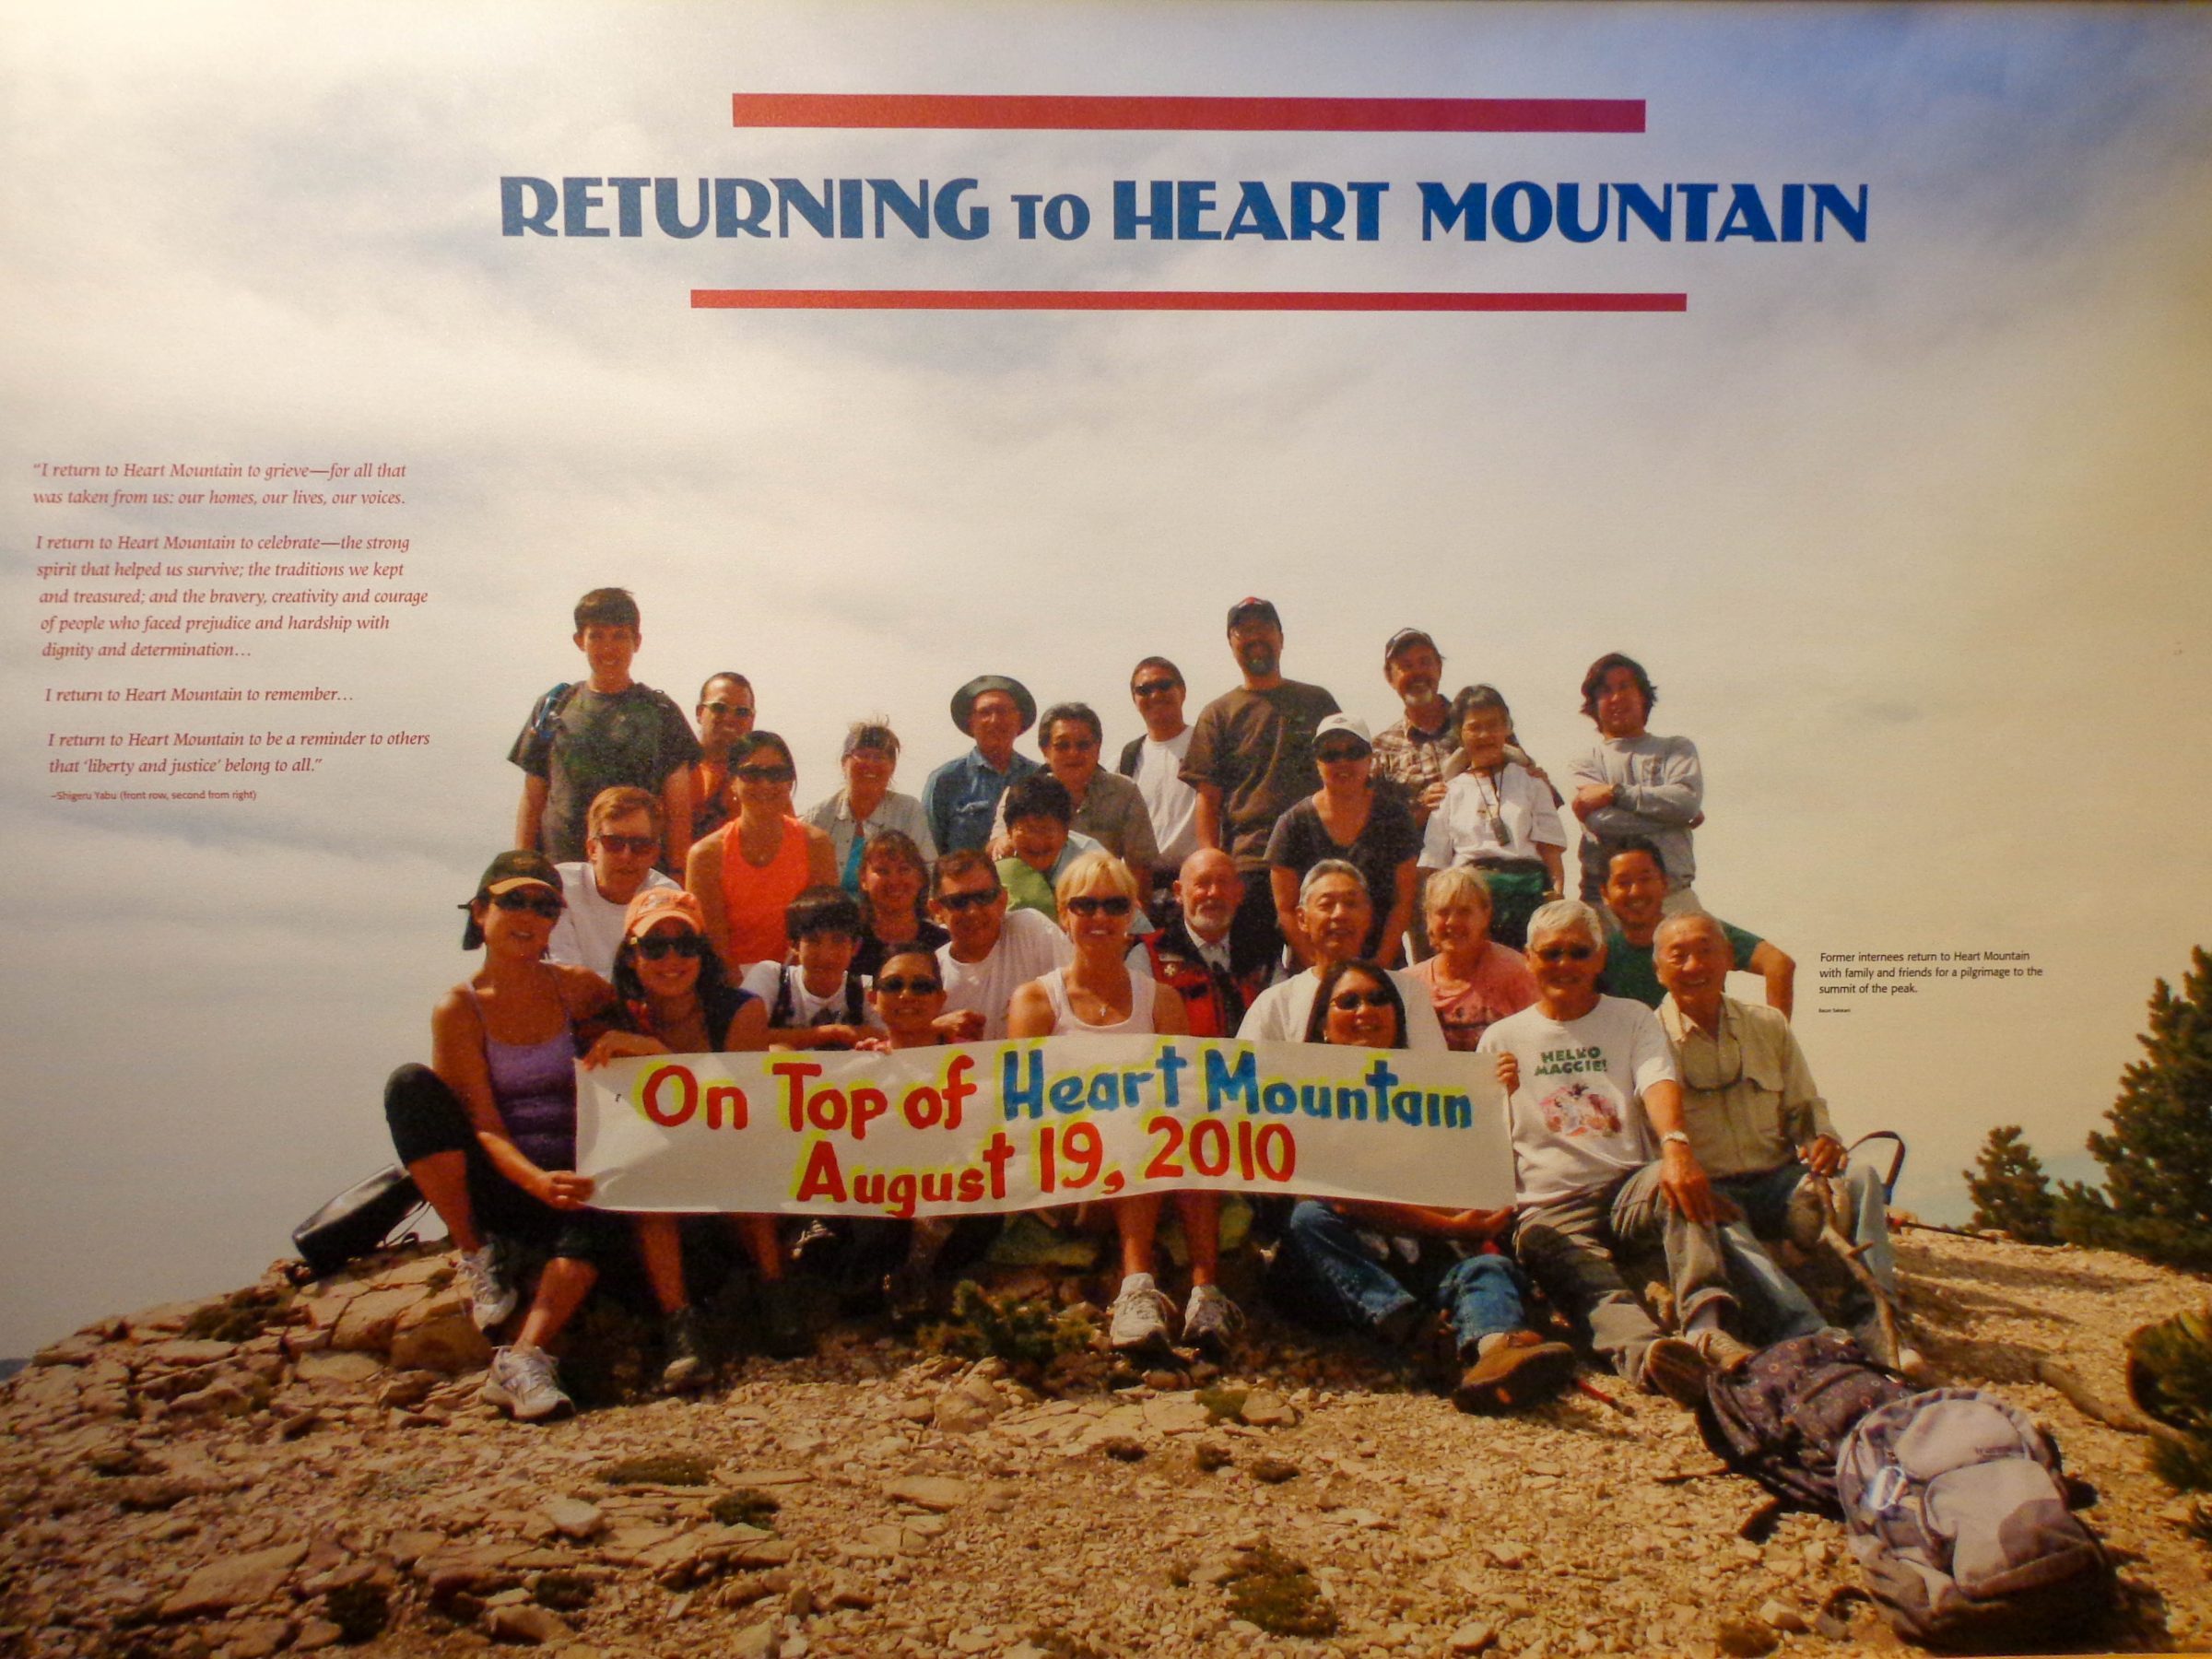 In 2010, a group of former Japanese camp inmates returned to Heart Mountain